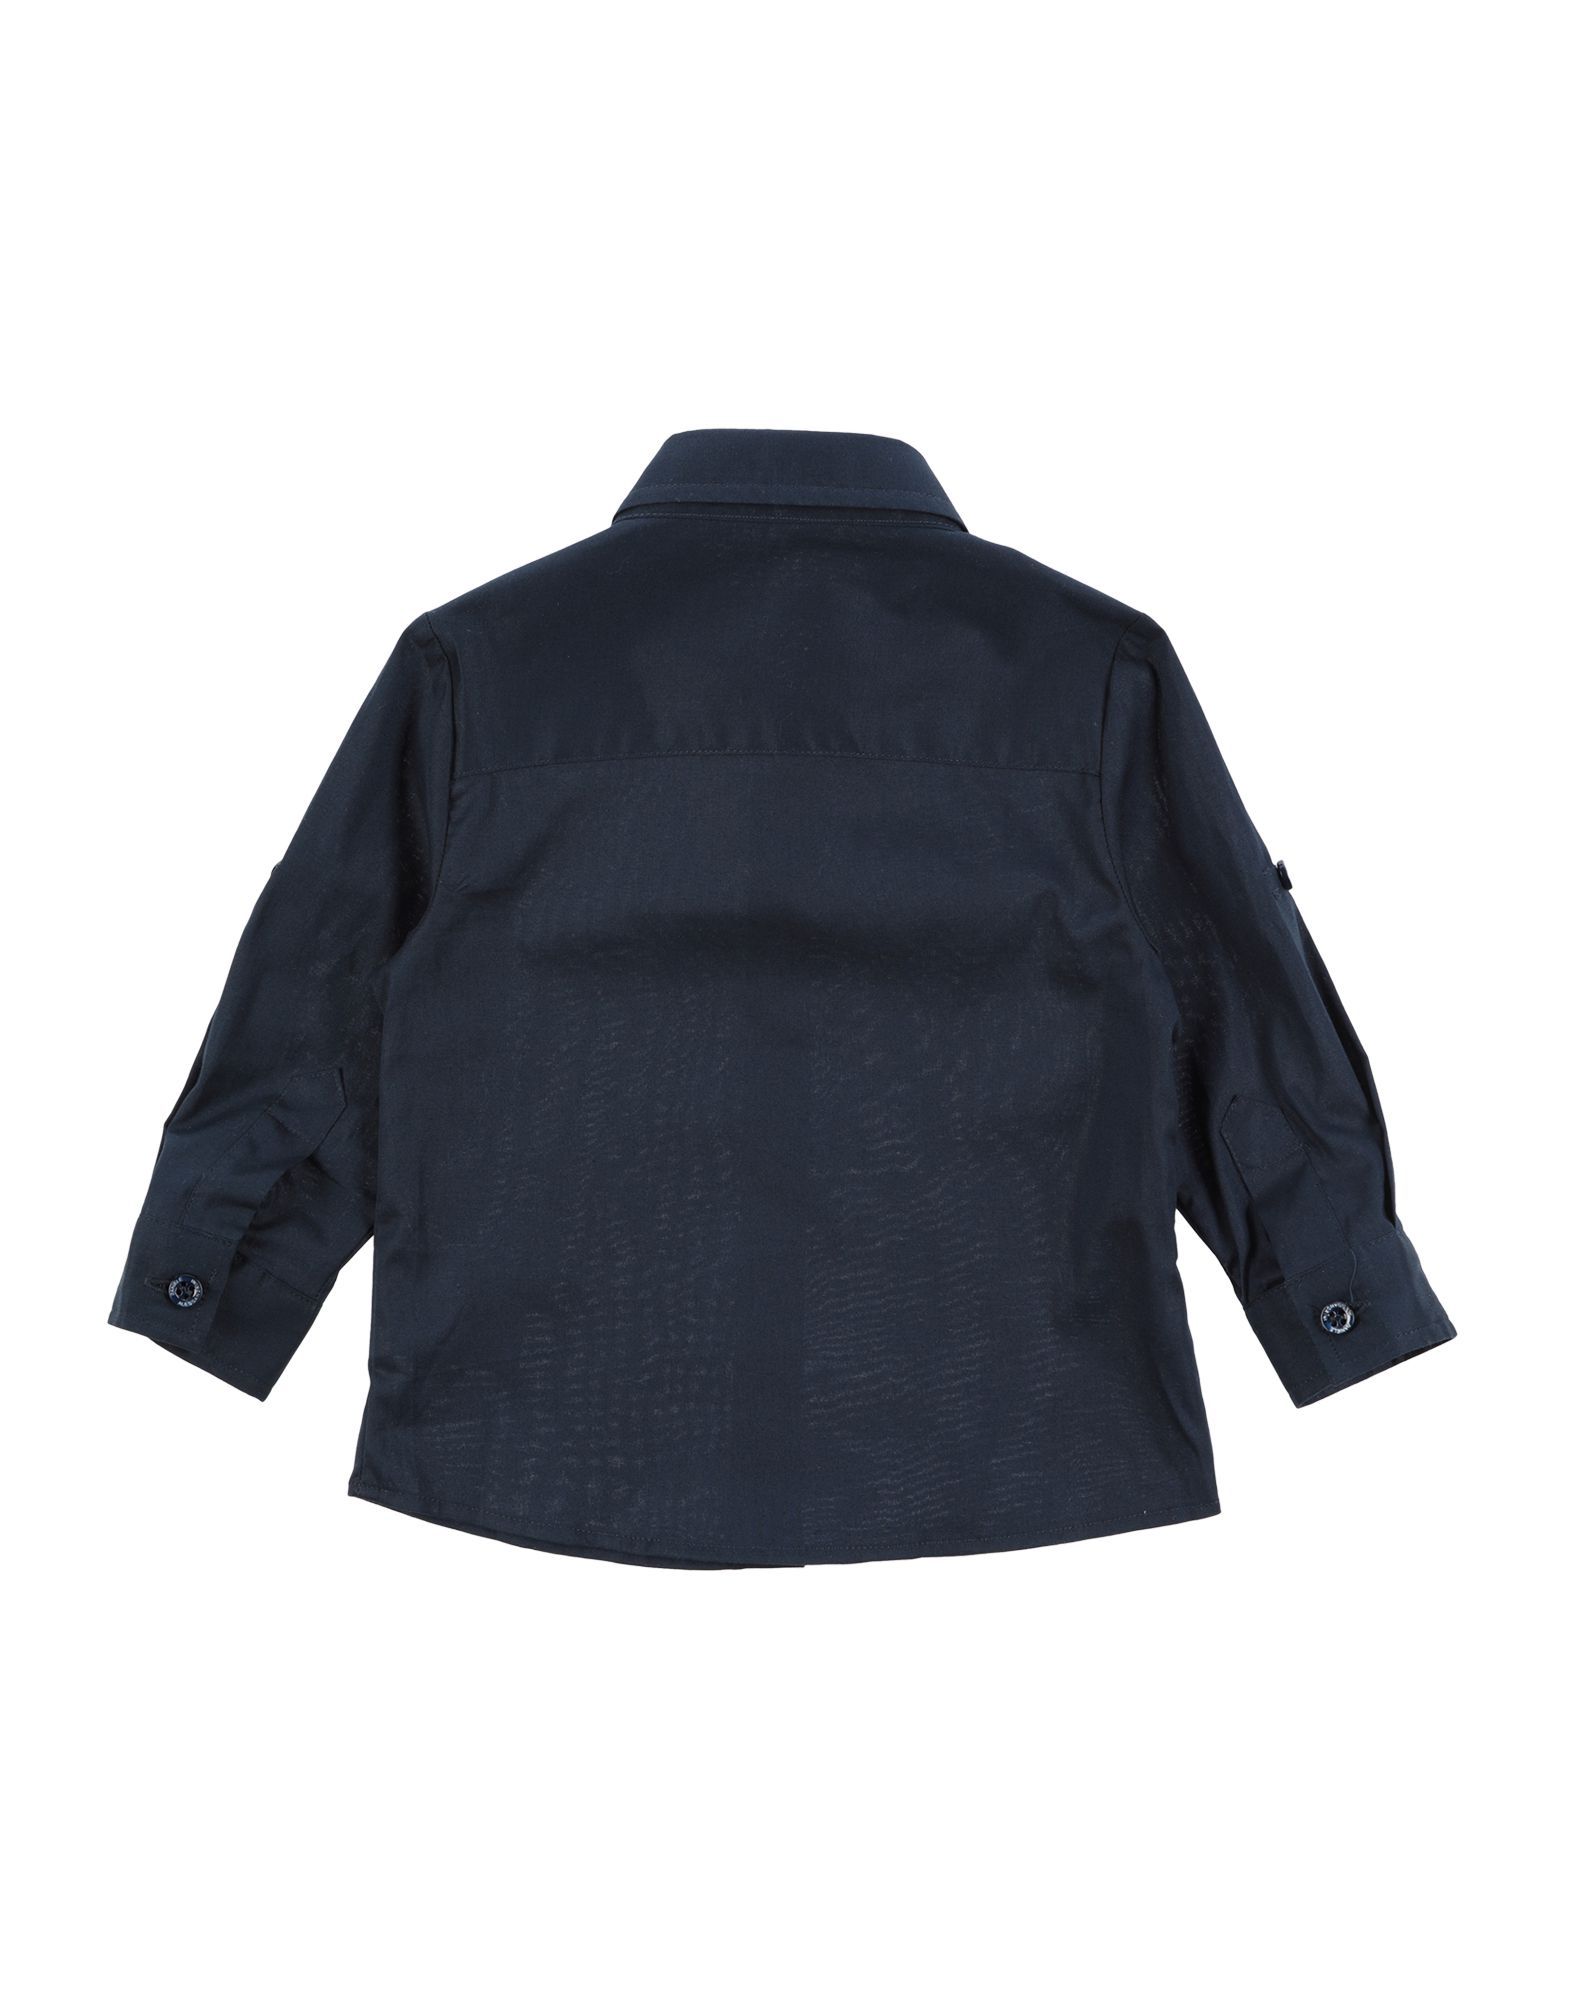 plain weave, logo, basic solid colour, front closure, button closing, long sleeves, buttoned cuffs, classic neckline, no pockets, wash at 30° c, dry cleanable, iron at 110° c max, do not bleach, do not tumble dry, stretch, small sized